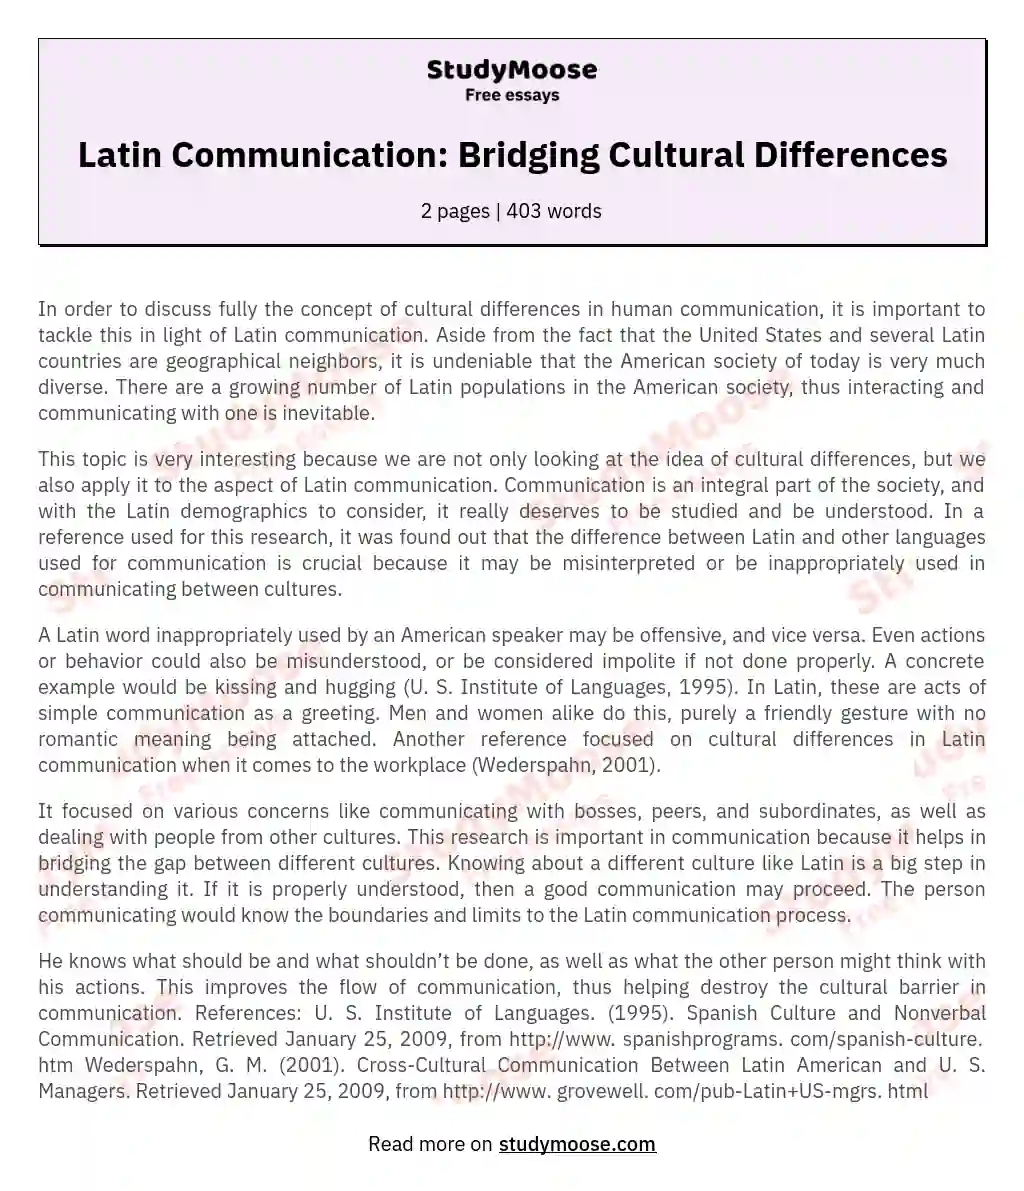 Latin Communication: Bridging Cultural Differences essay